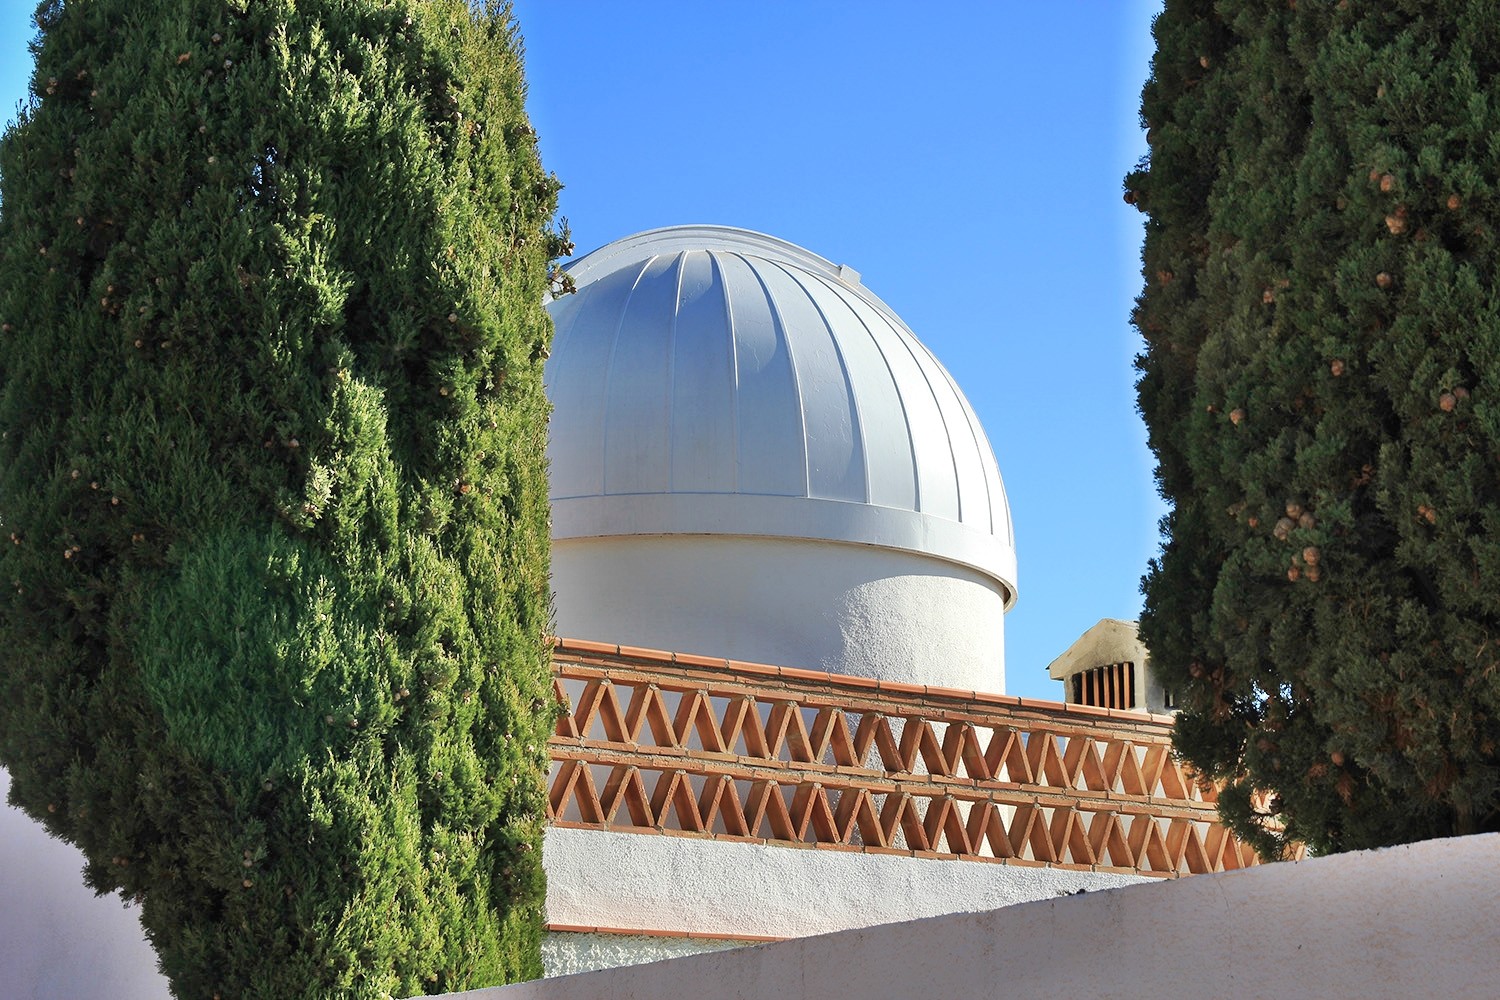 The astronomical observatory of the complex